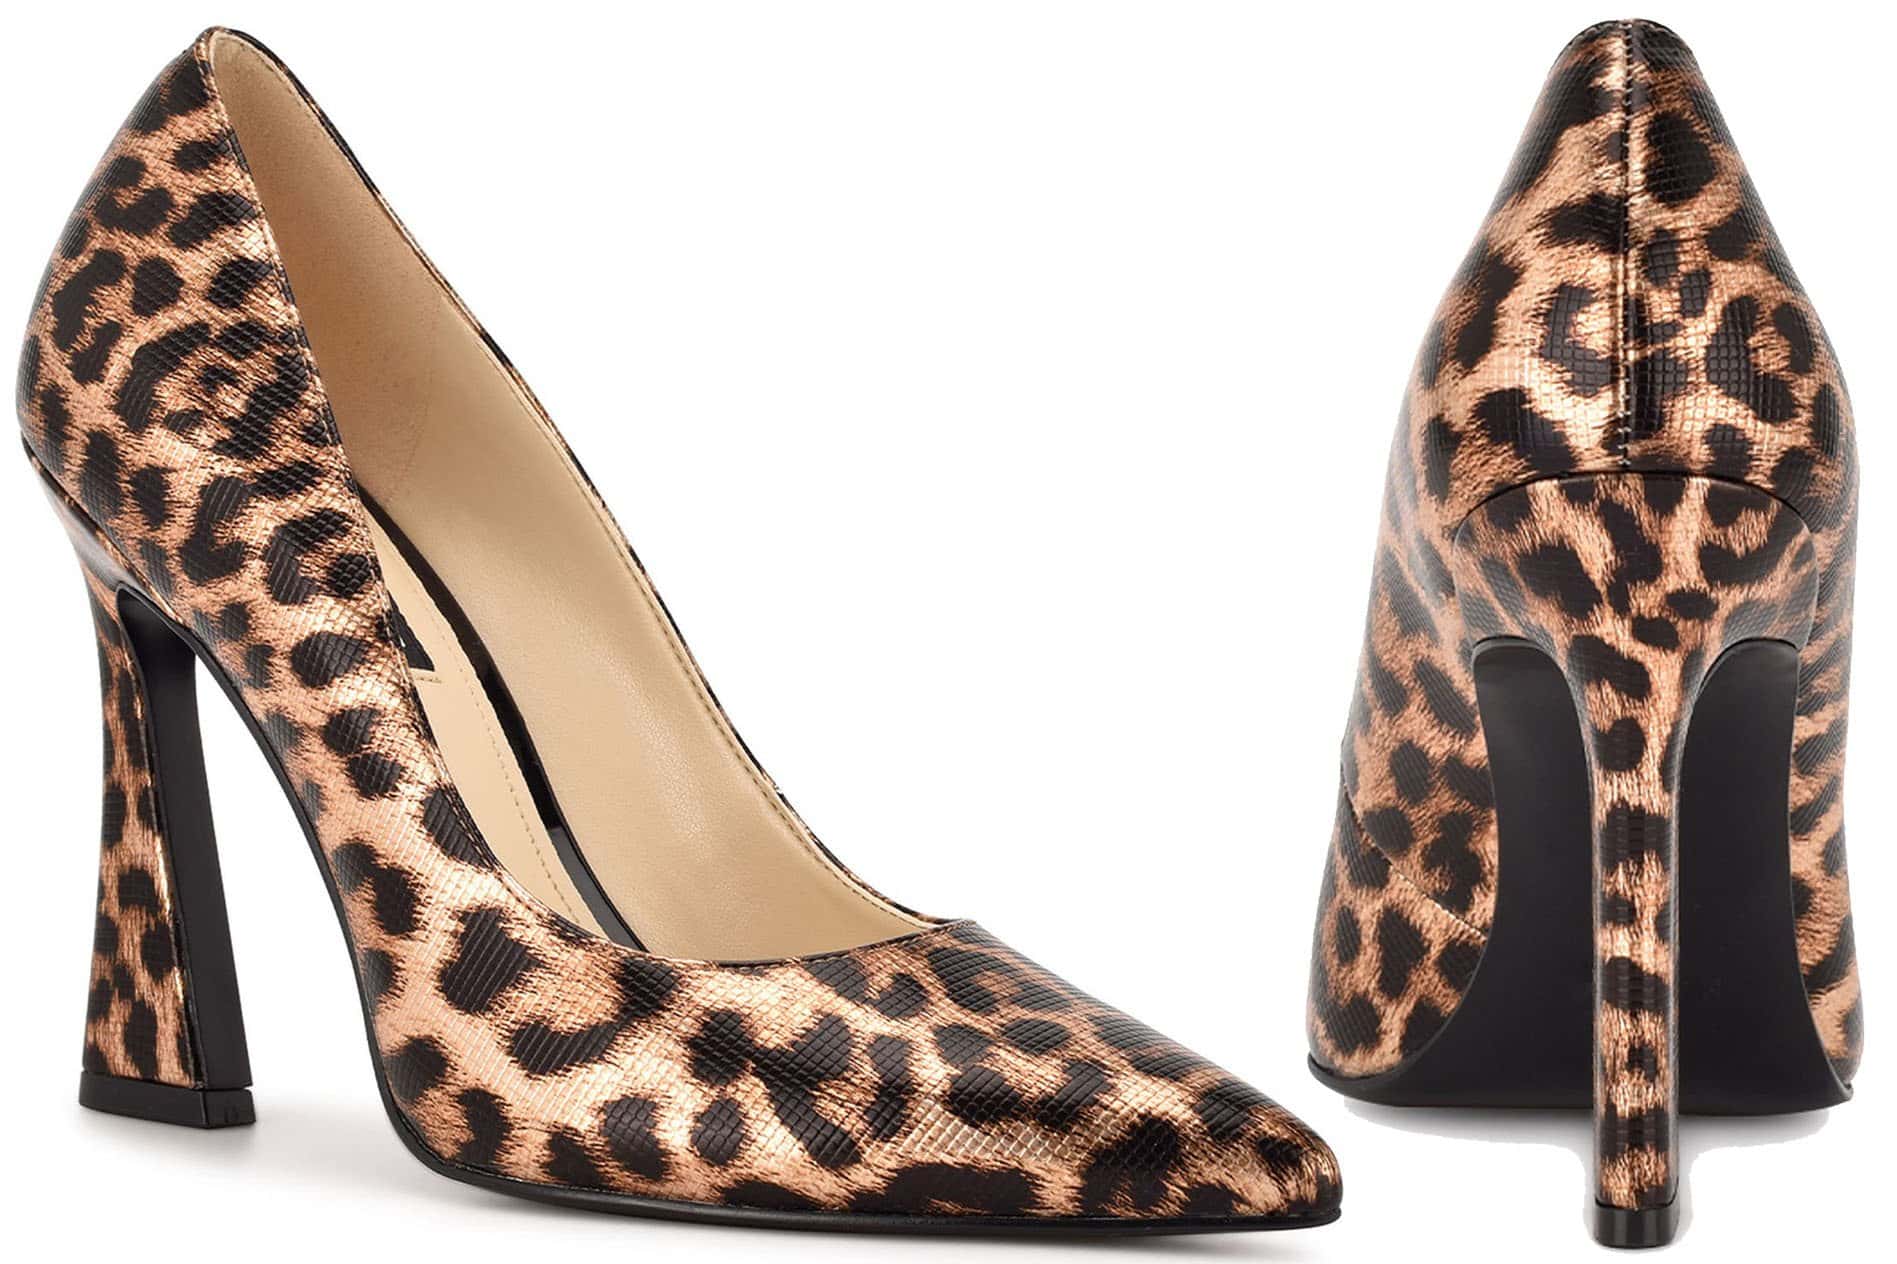 Featuring irregular, clustered rosettes, you can easily pair these leopard-print shoes with dresses or jeans